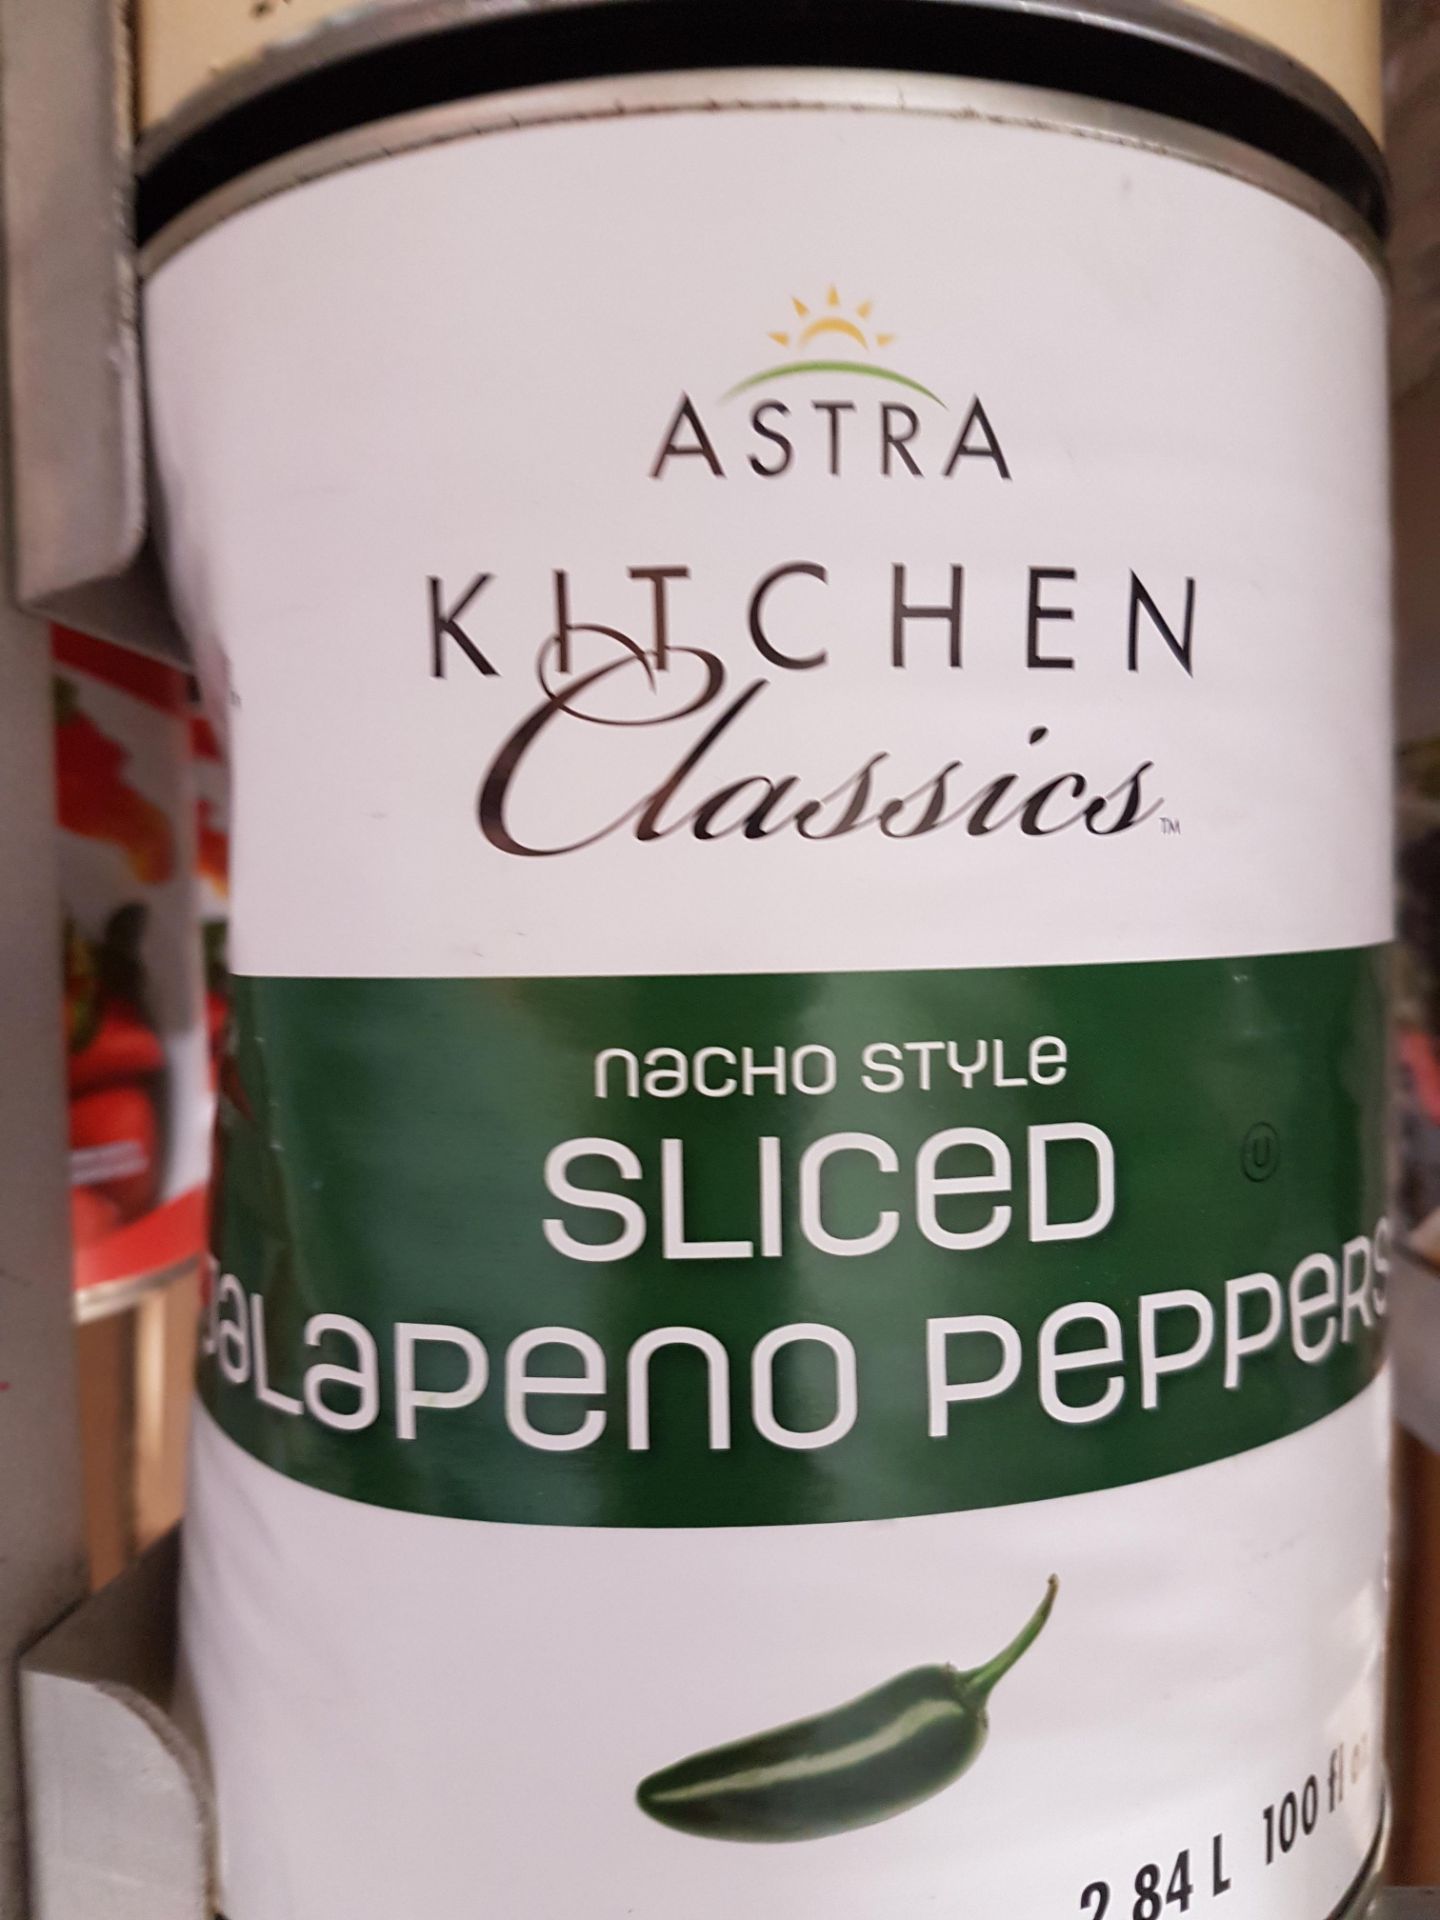 Astra Nacho Style Sliced Jalapeno Peppers - 2 x 2.84LT Cans - Dented